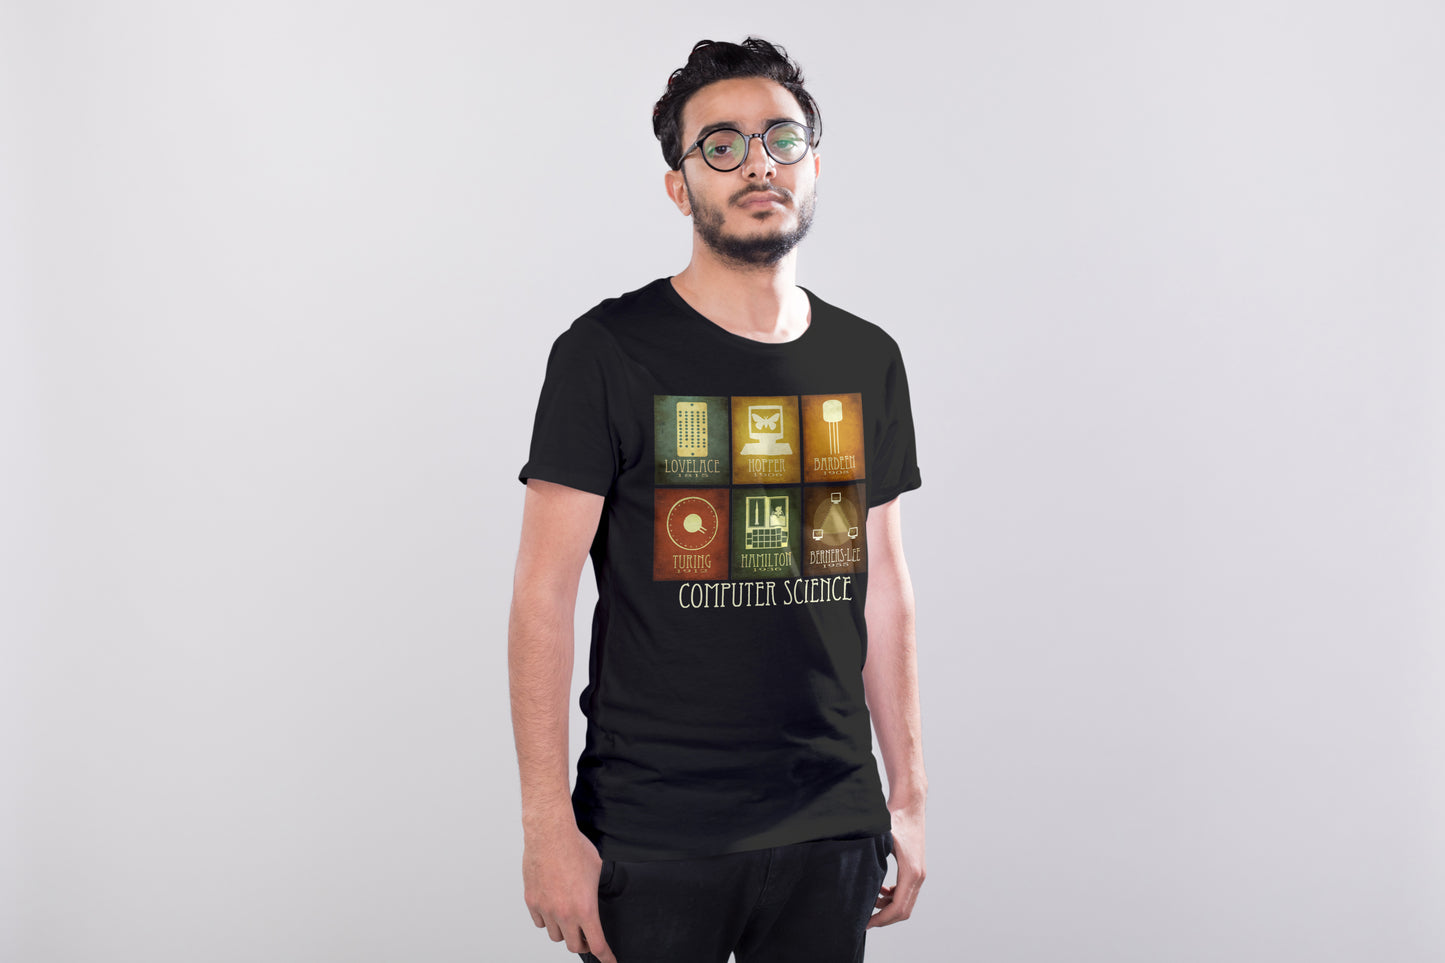 Computer Science T-shirt, 6 Programmers and Scientists in History